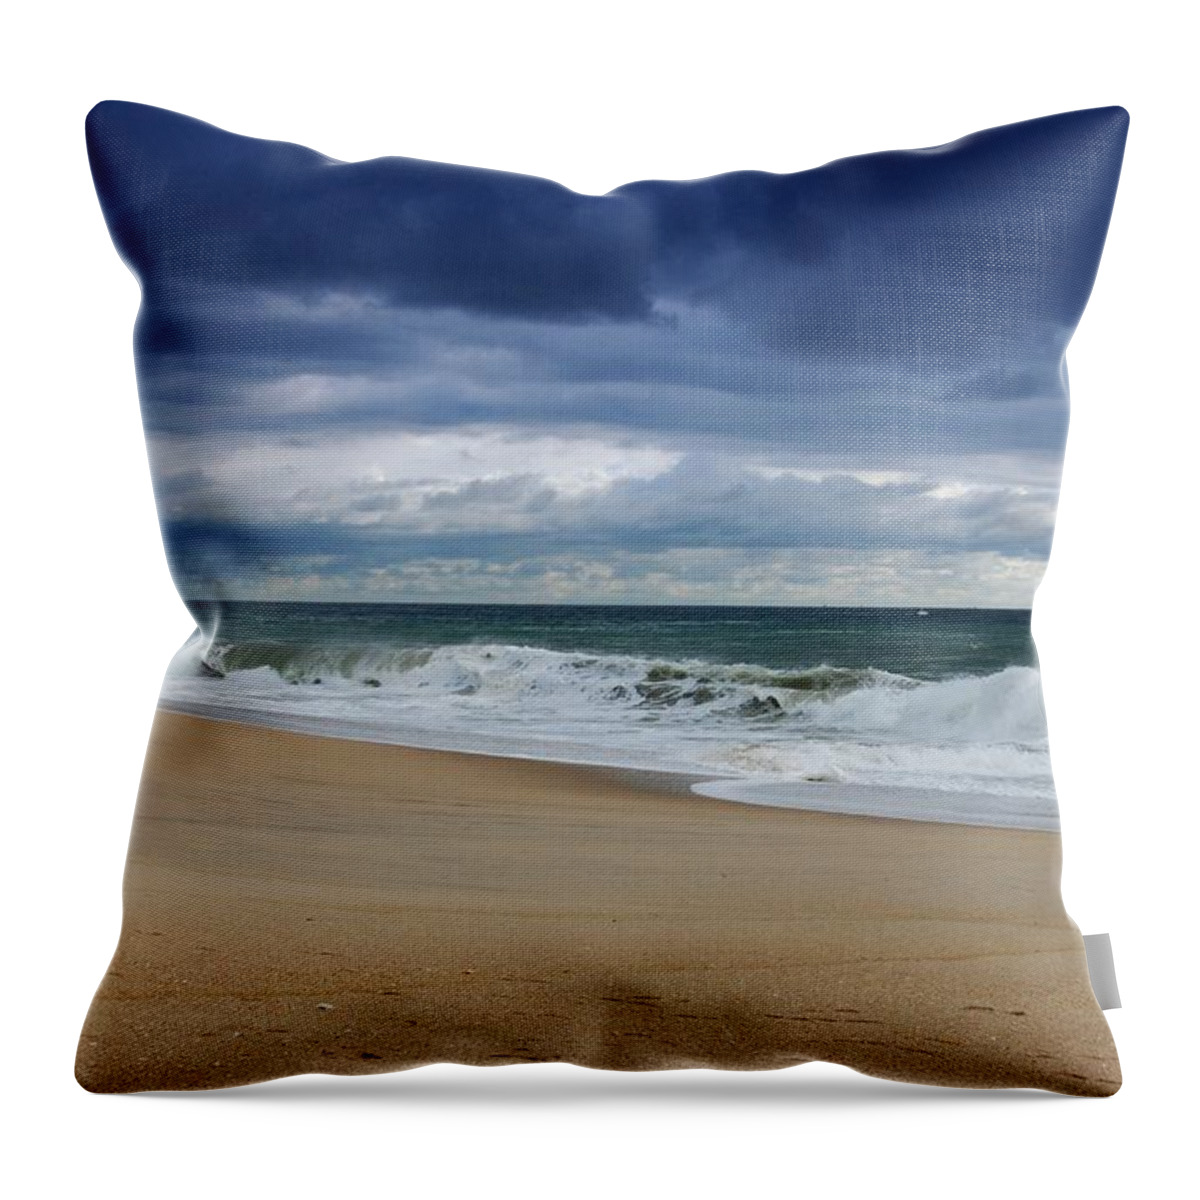 Jersey Shore Beaches Throw Pillow featuring the photograph Its Alright - Jersey Shore by Angie Tirado